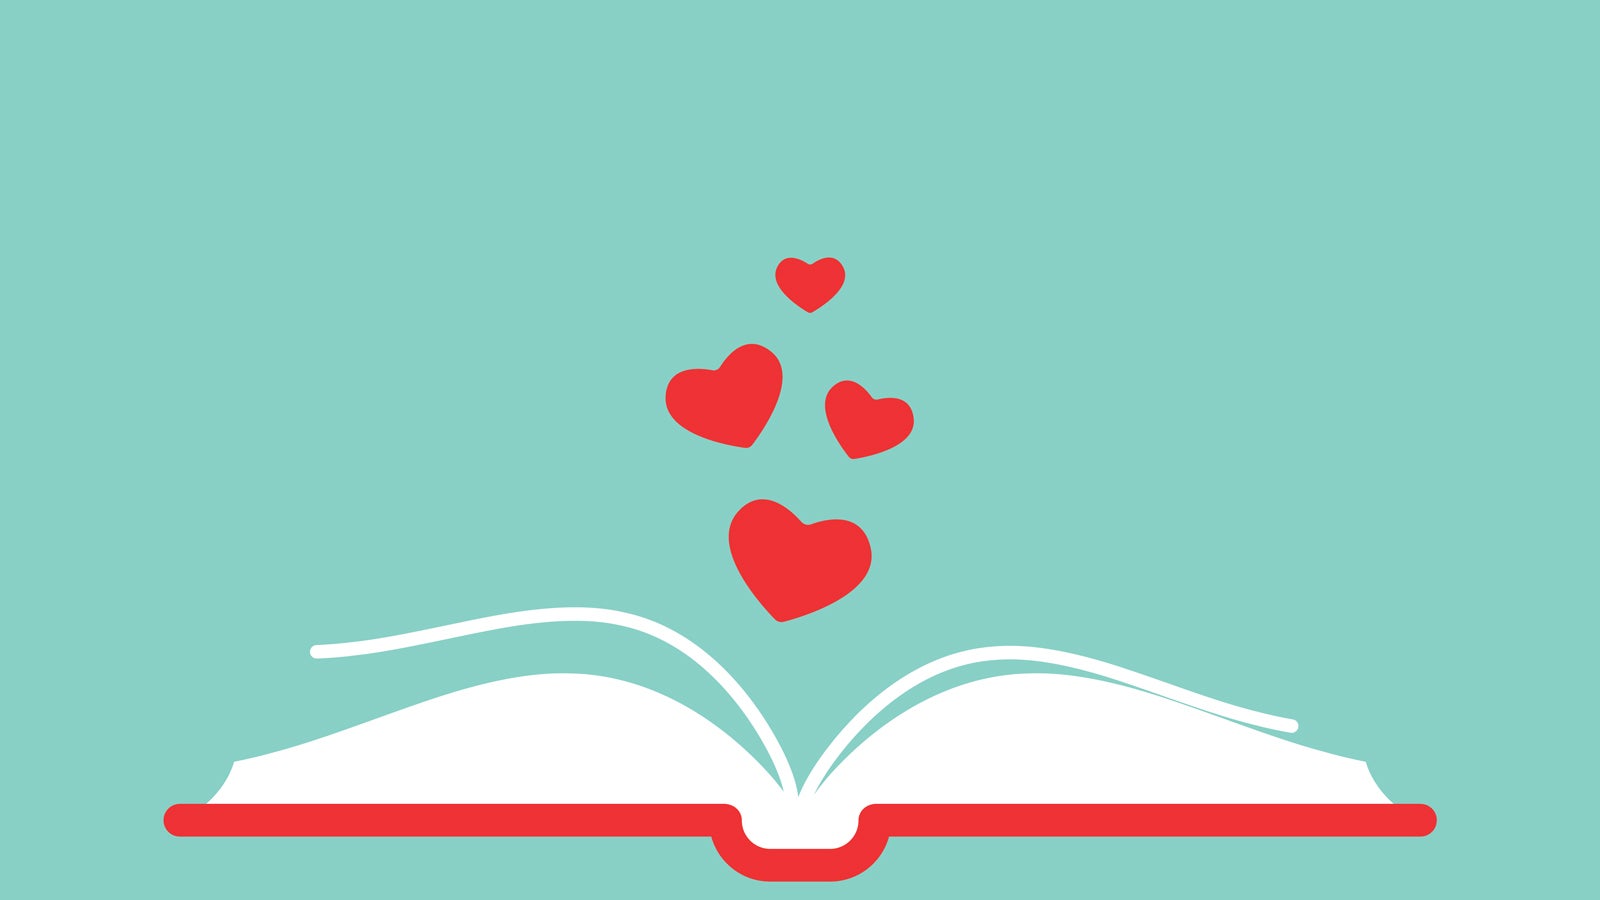 An illustration of a book laying open on its spine with hearts flying upwards from the pages